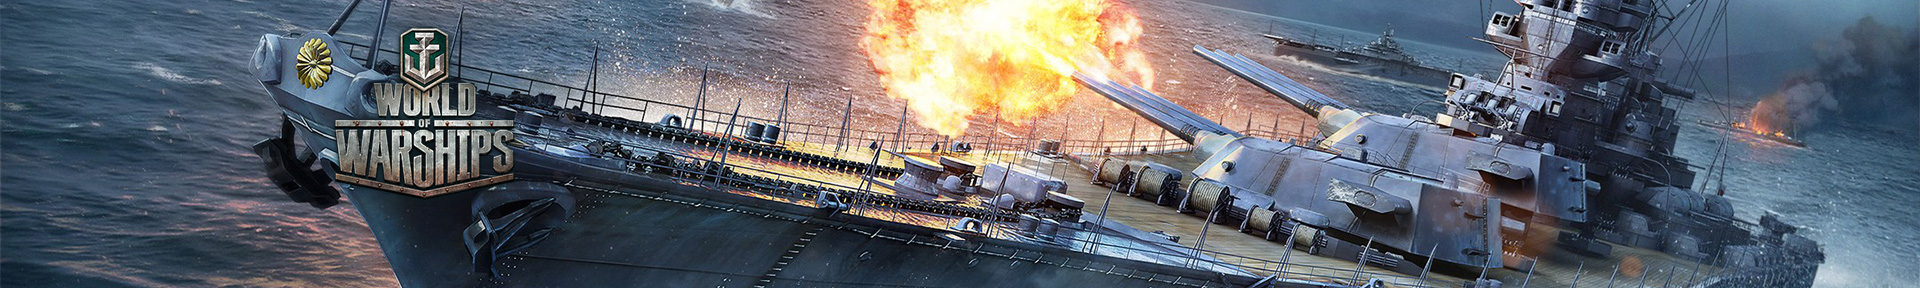 world of warships free doubloons